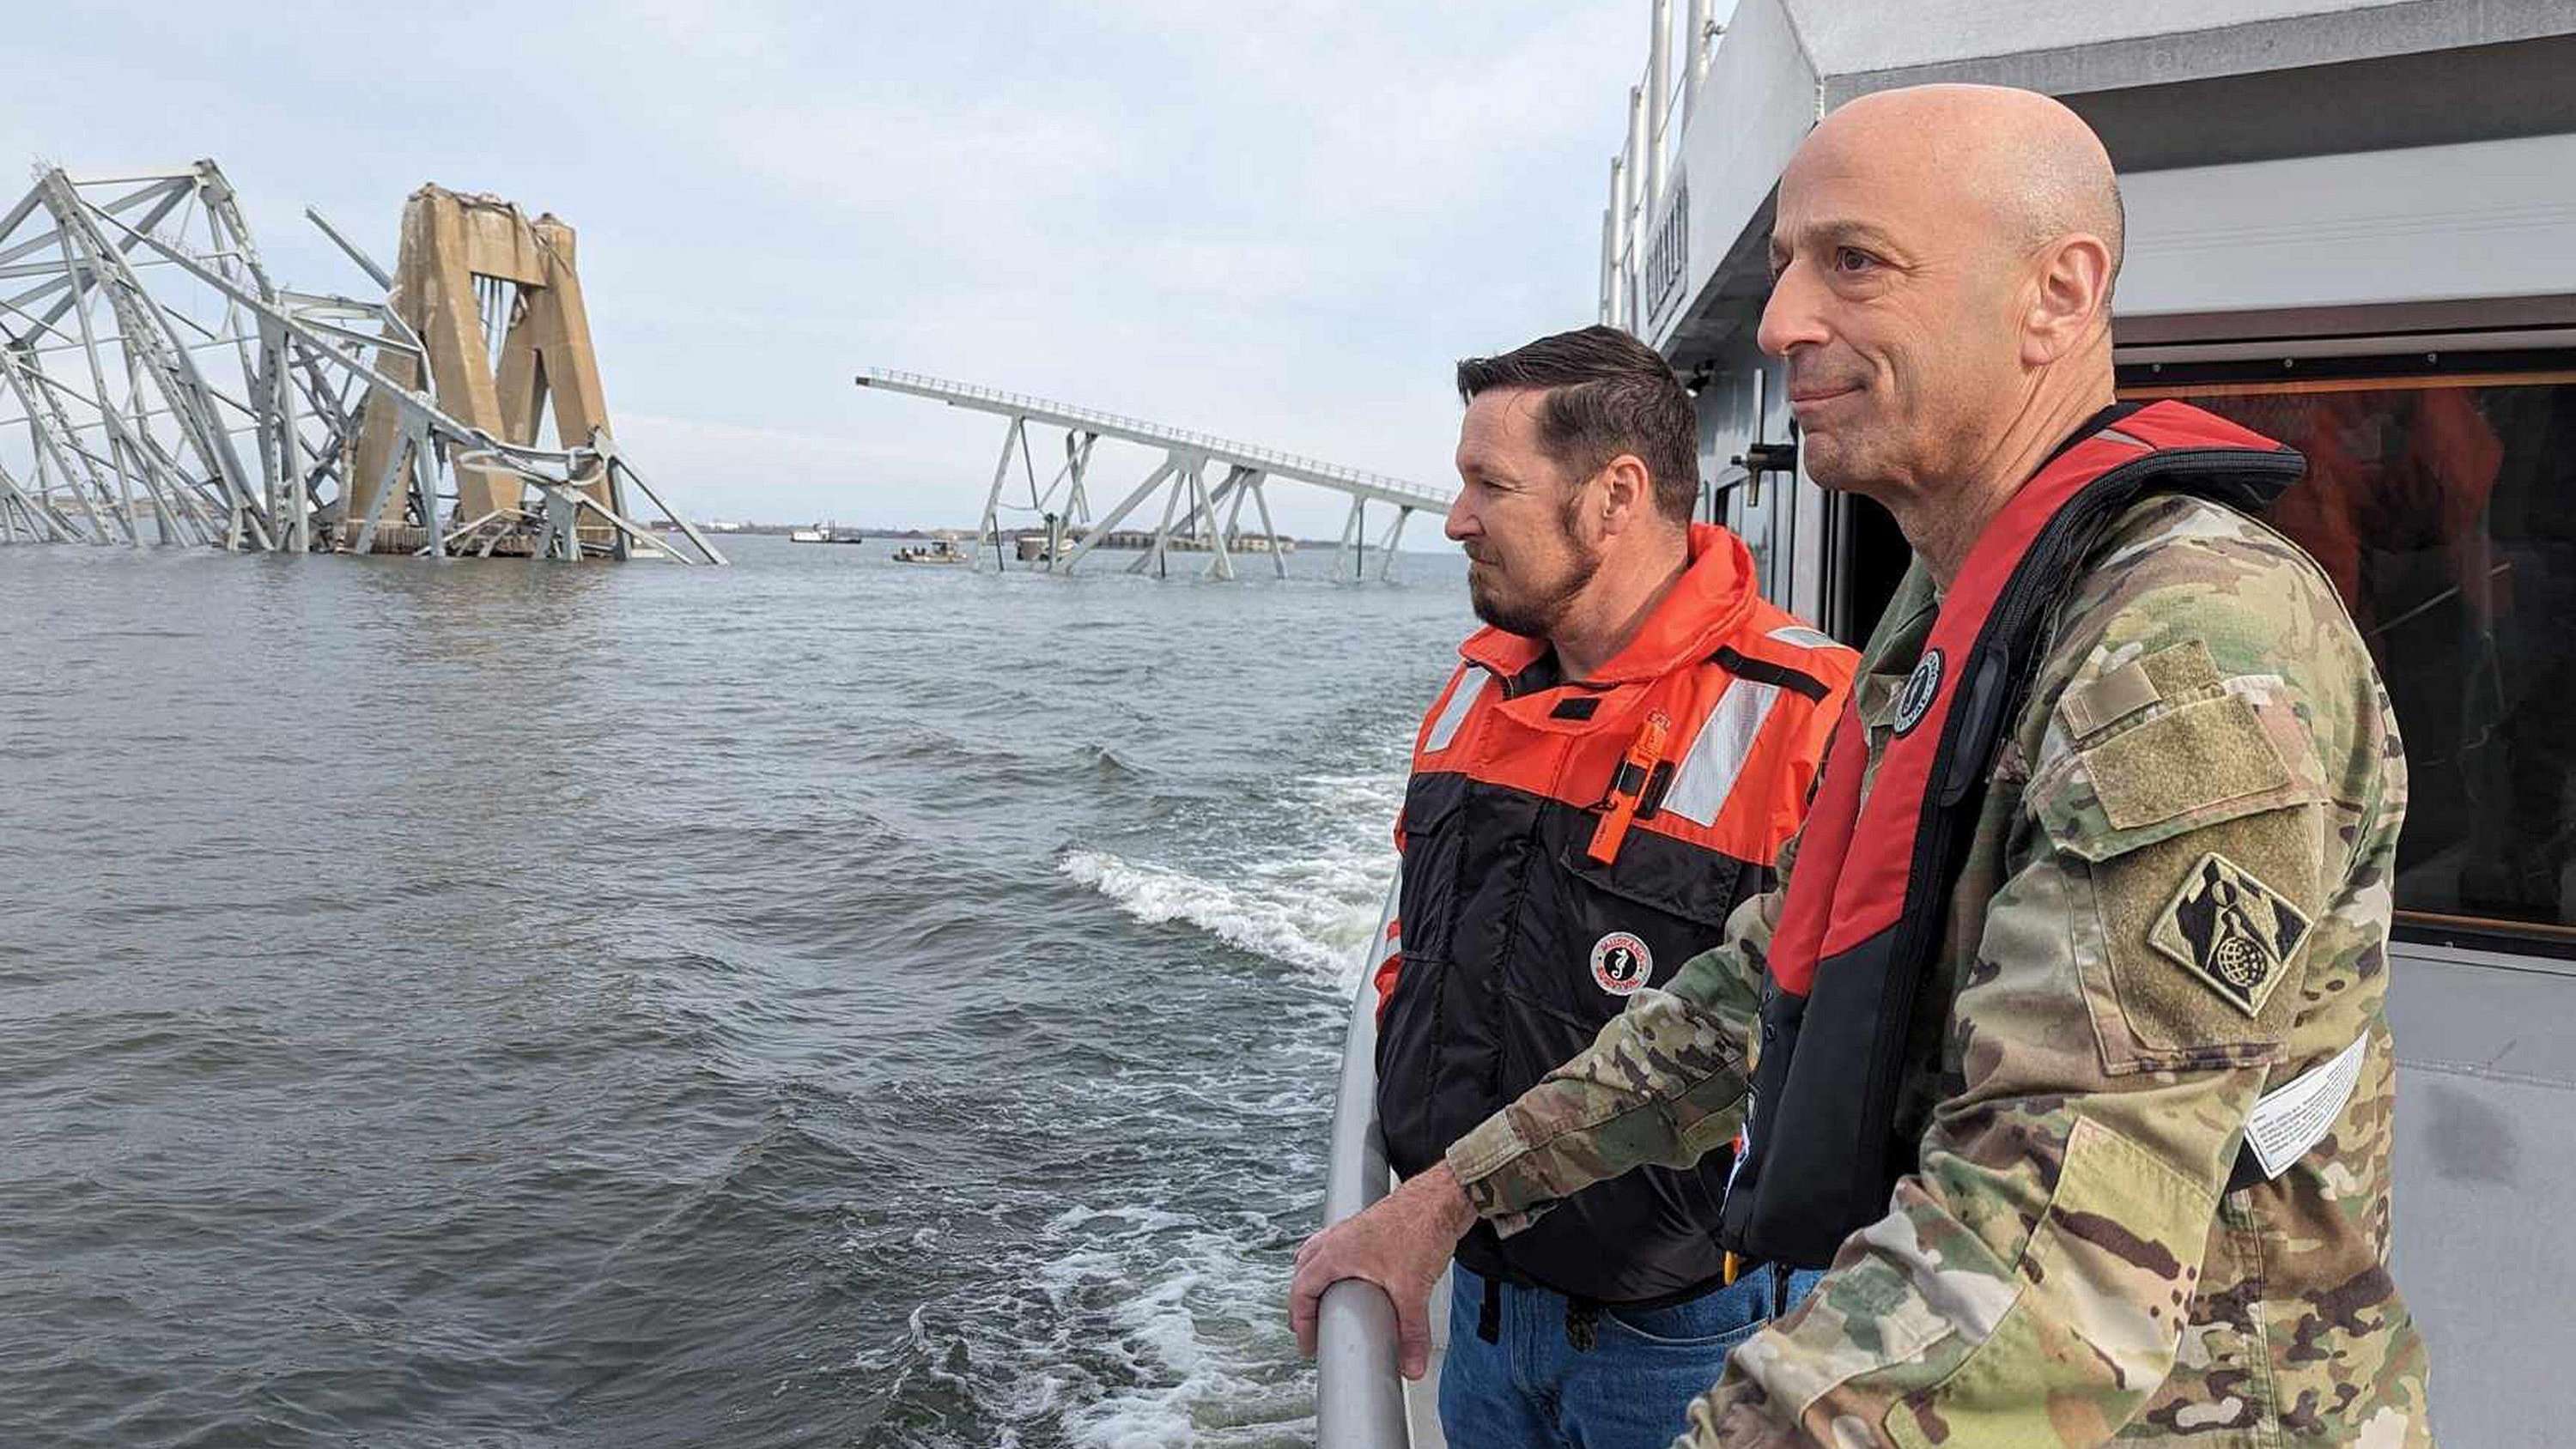 Lieutenant General Scott Spellmon of the US Army Corps of Engineers views the damage to the Francis Scott Key Bridge